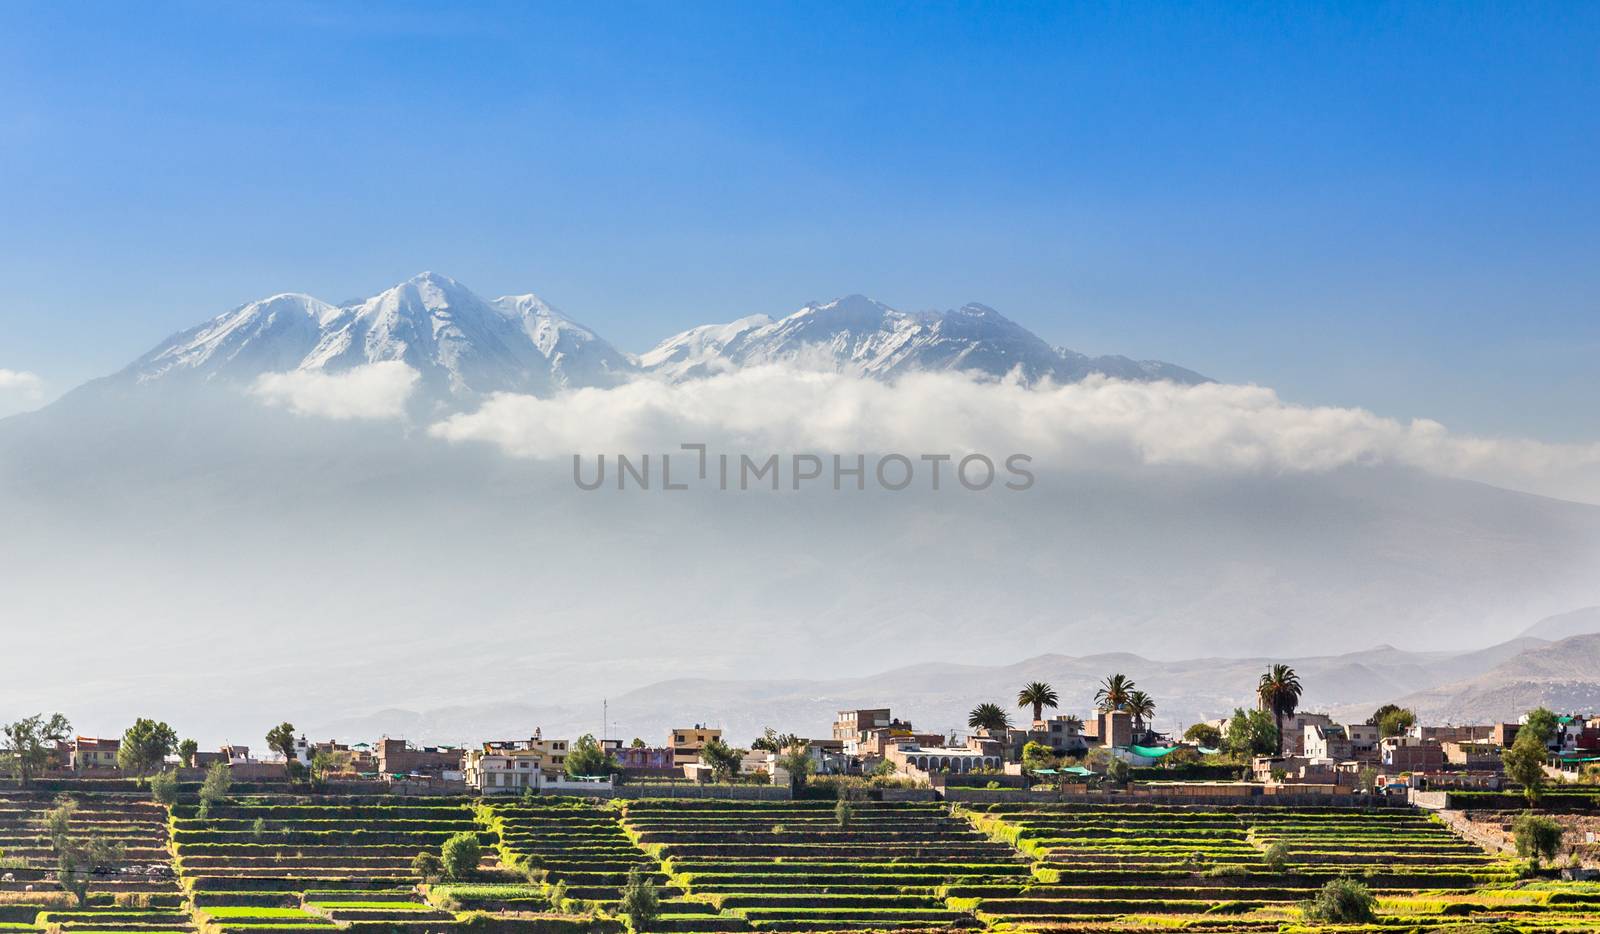 Snow capes of chachani Volcano over the fields and houses of per by ambeon